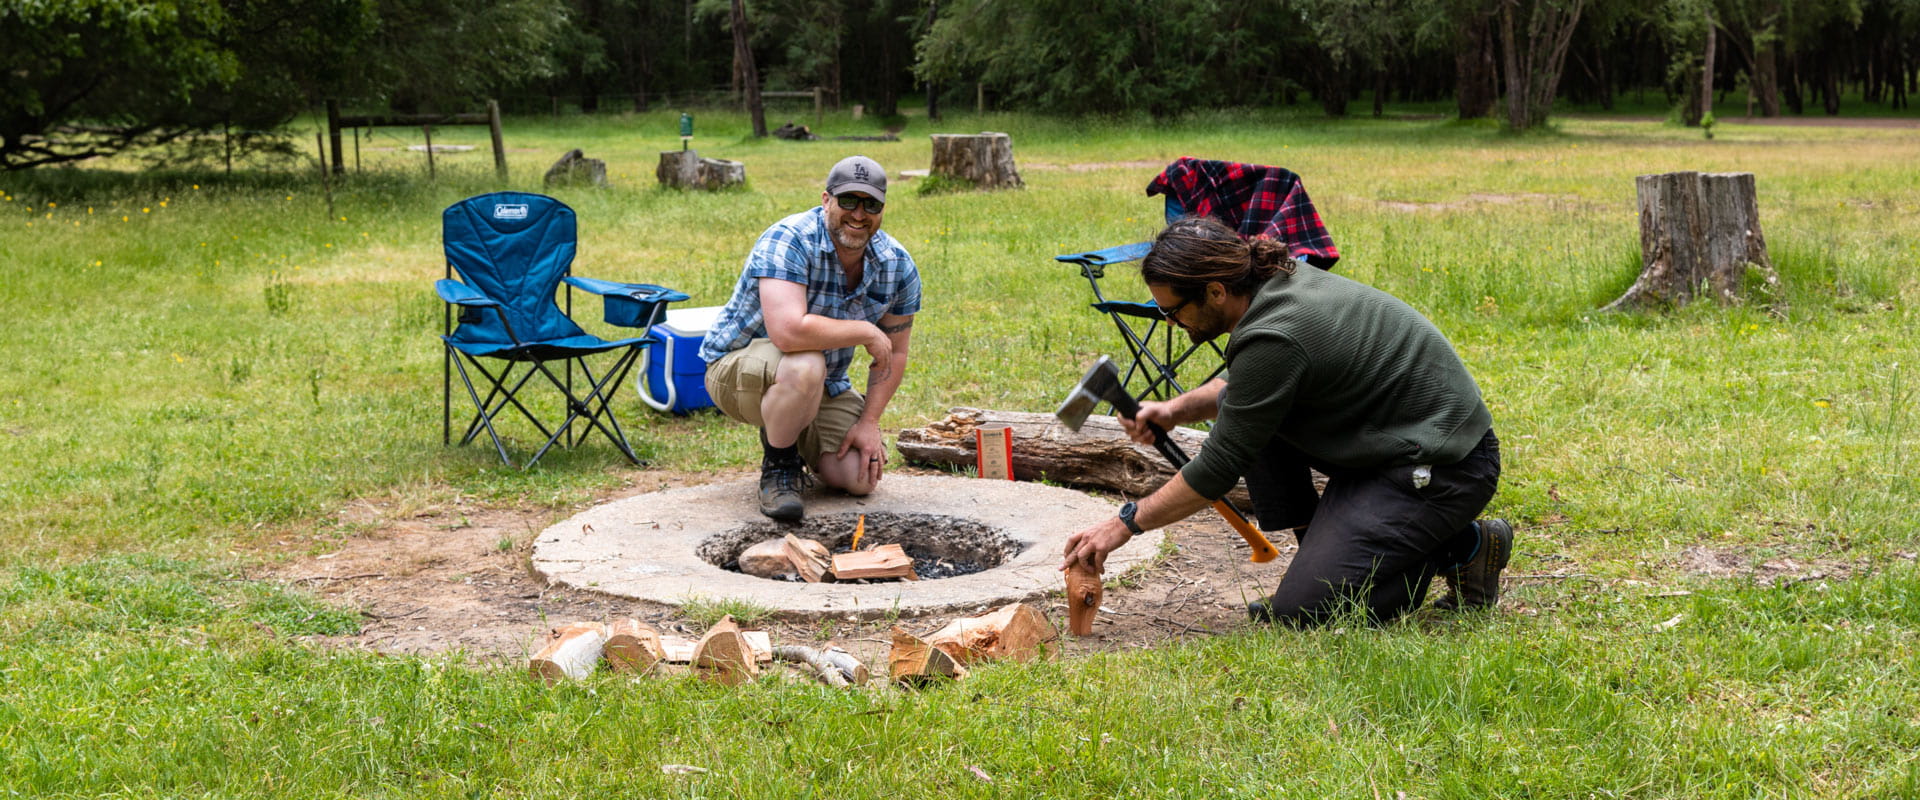 A man kneels to chop firewood while another man helps to tend to the fire pit nestled in front of their two camping chairs and esky.